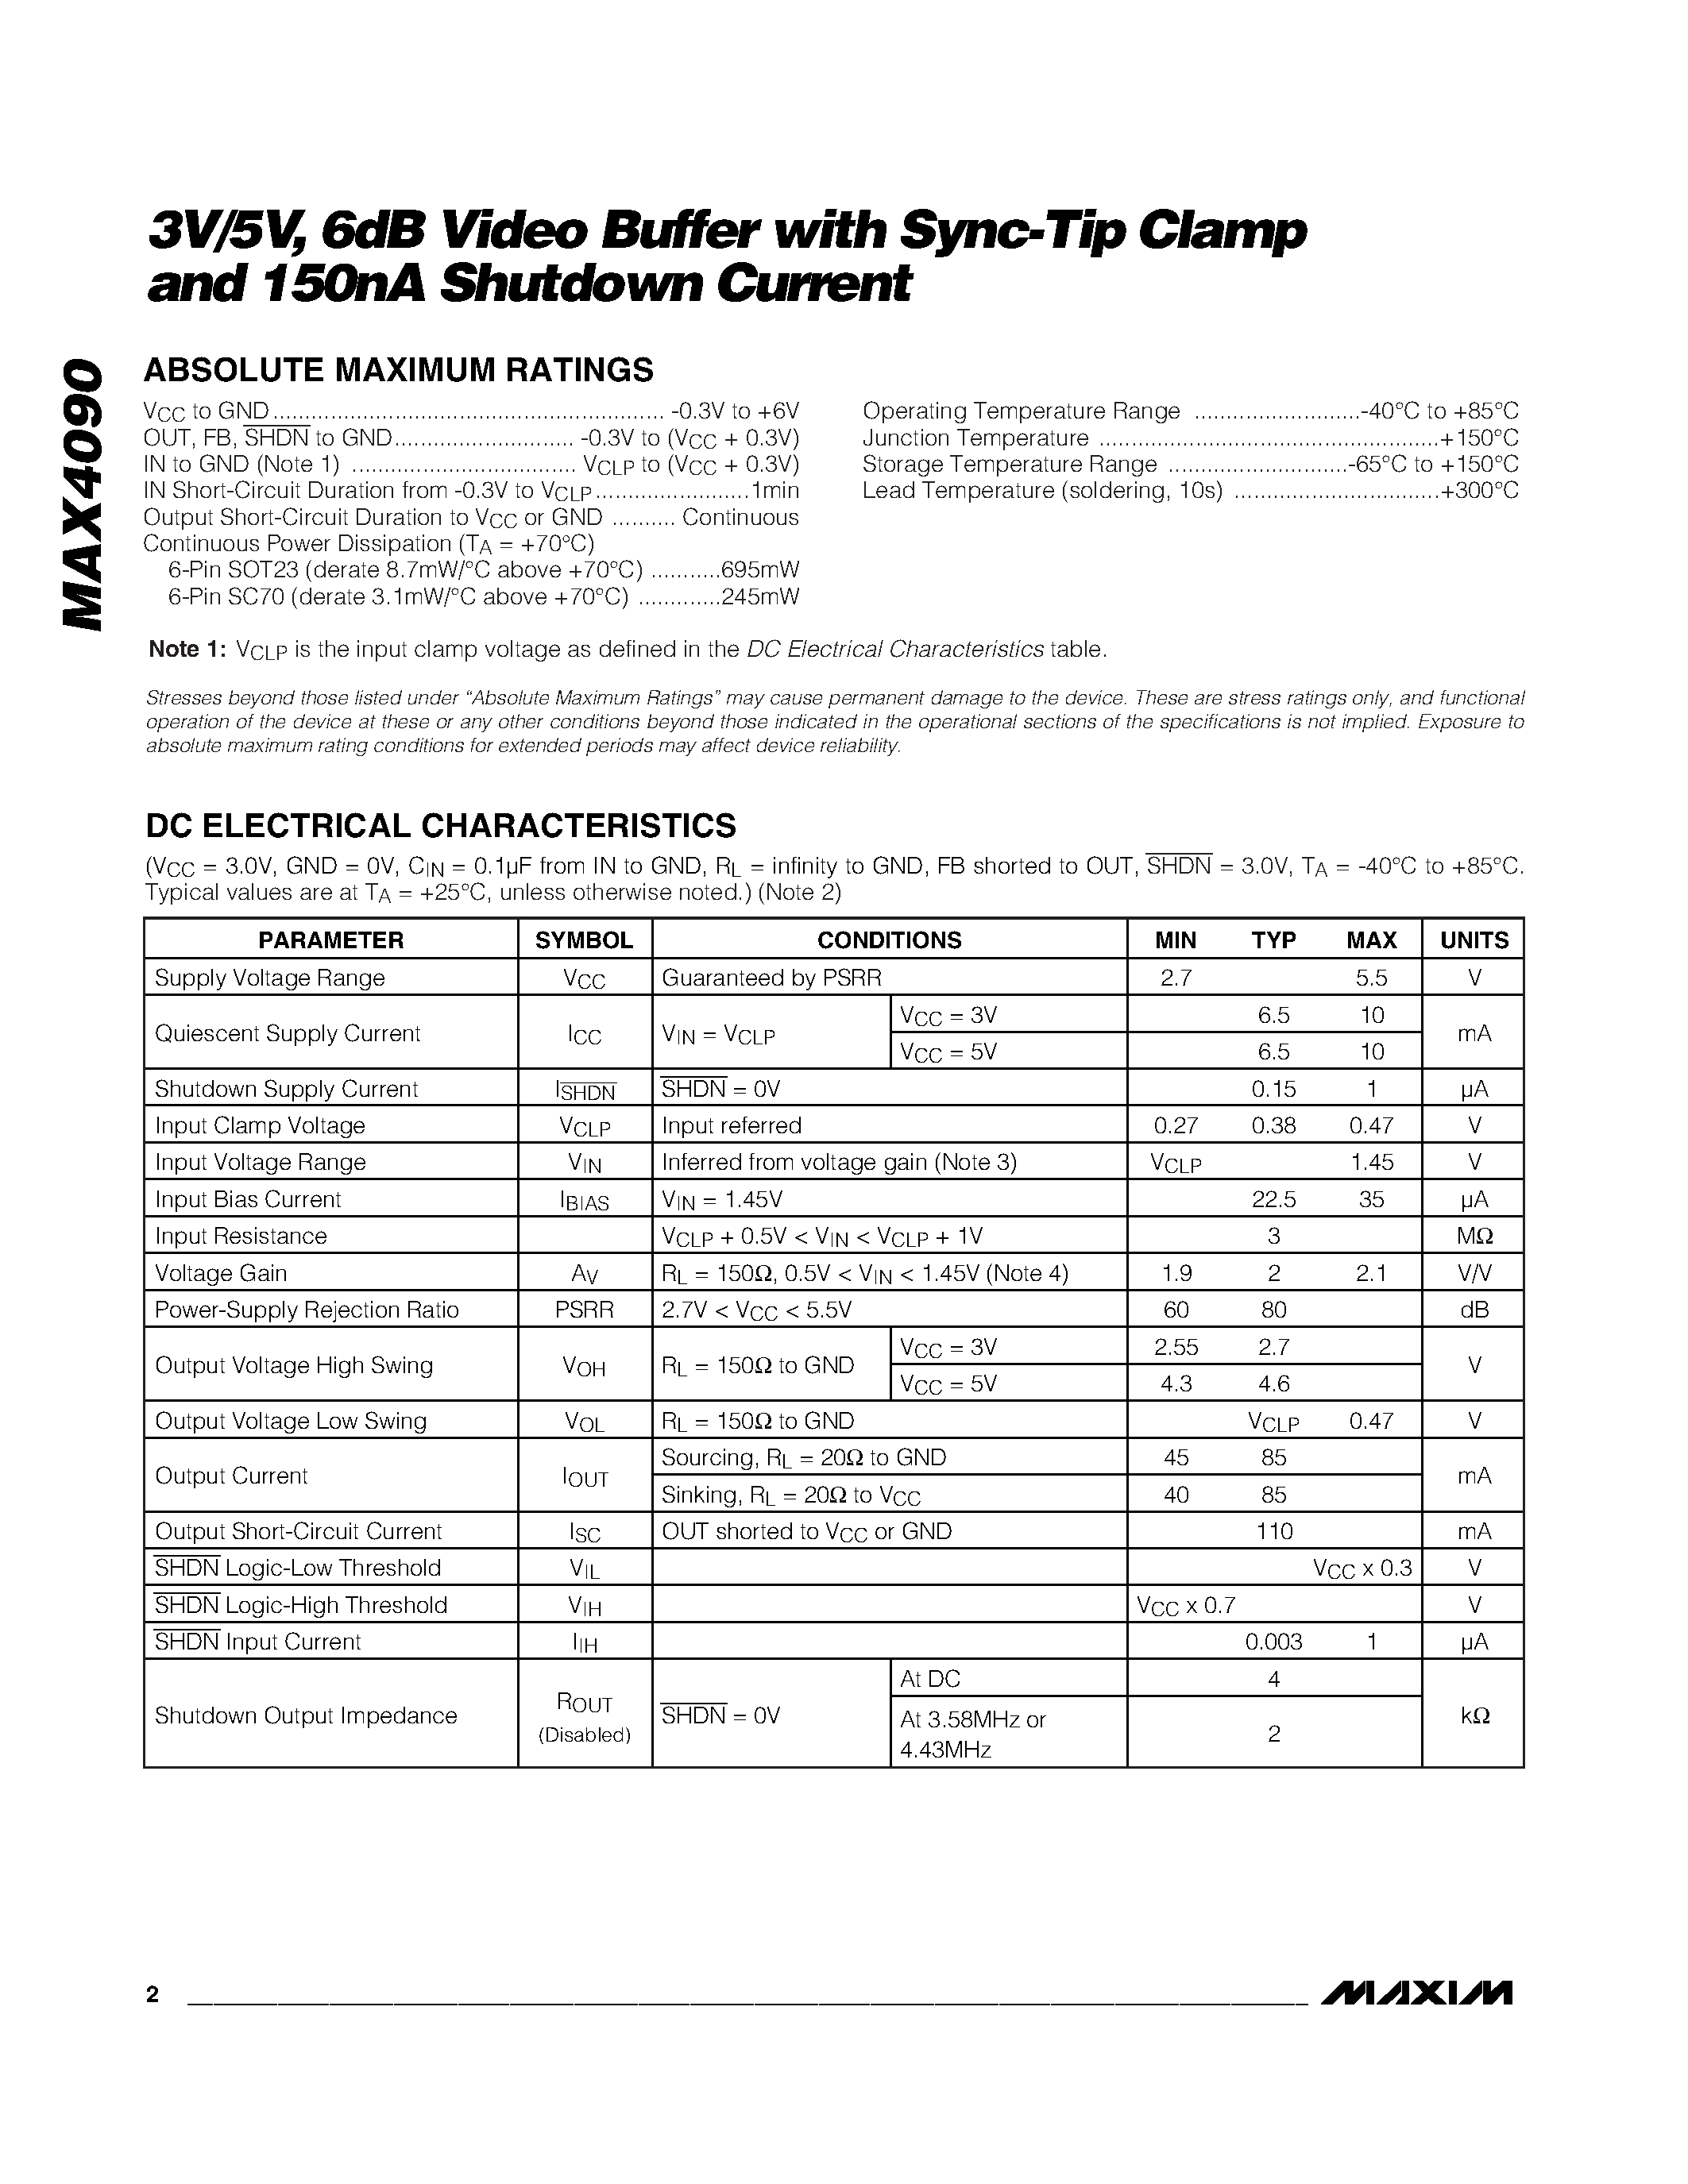 Datasheet MAX4090 - 3V/5V / 6dB Video Buffer with Sync-Tip Clamp and 150nA Shutdown Current page 2